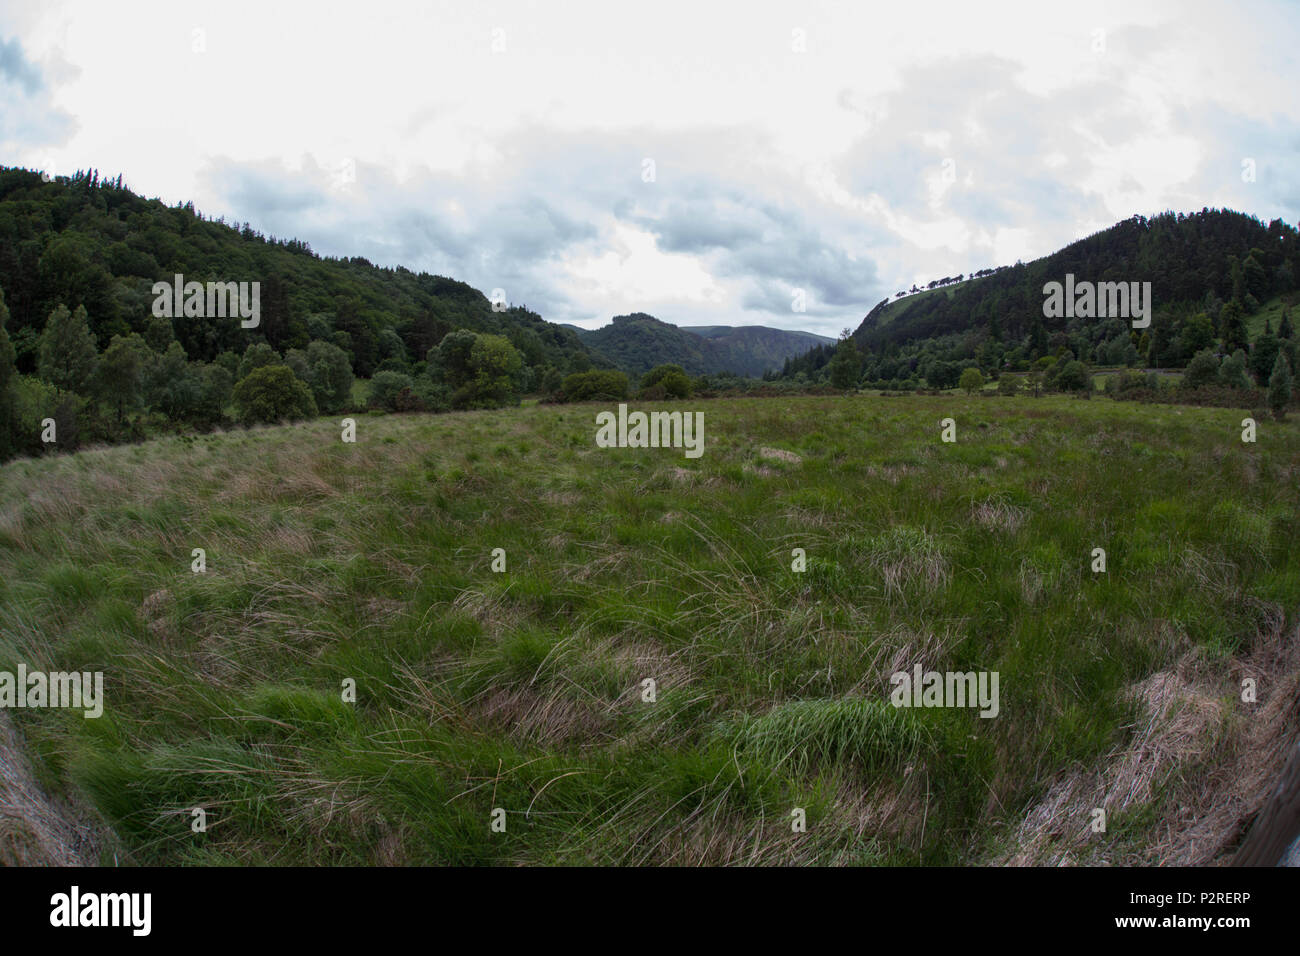 June 15, 2018 - Wicklow, Ireland - View of Glendalough Park in Wicklow, Ireland. The site housed a religious complex, built in the 8th century, which was attacked and destroyed by the Vikings and British. (Credit Image: © Paulo Lopes via ZUMA Wire) Stock Photo